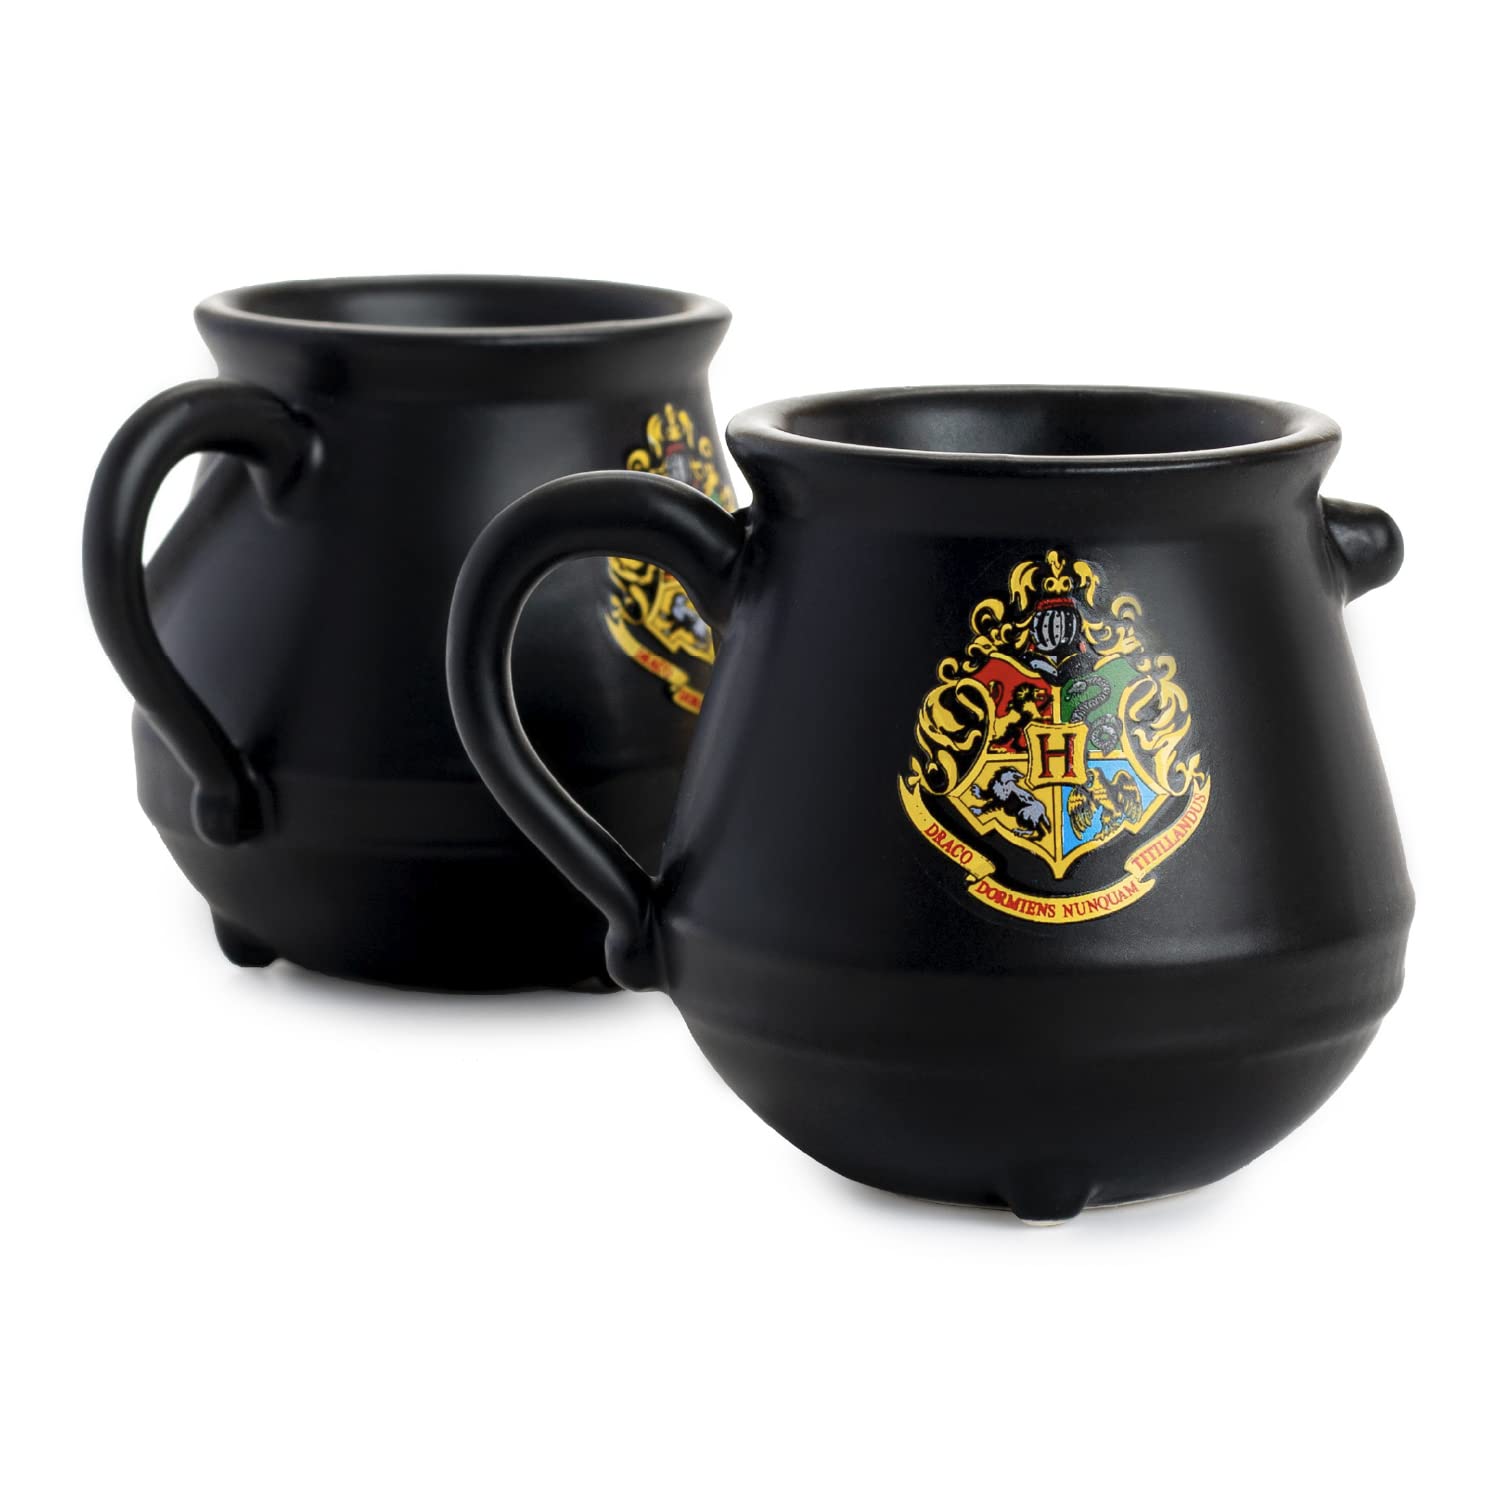 Experience the Magic of Harry Potter with Officially Licensed Cauldron Espresso Mugs - Set of 2 Featuring Hogwarts Crest.